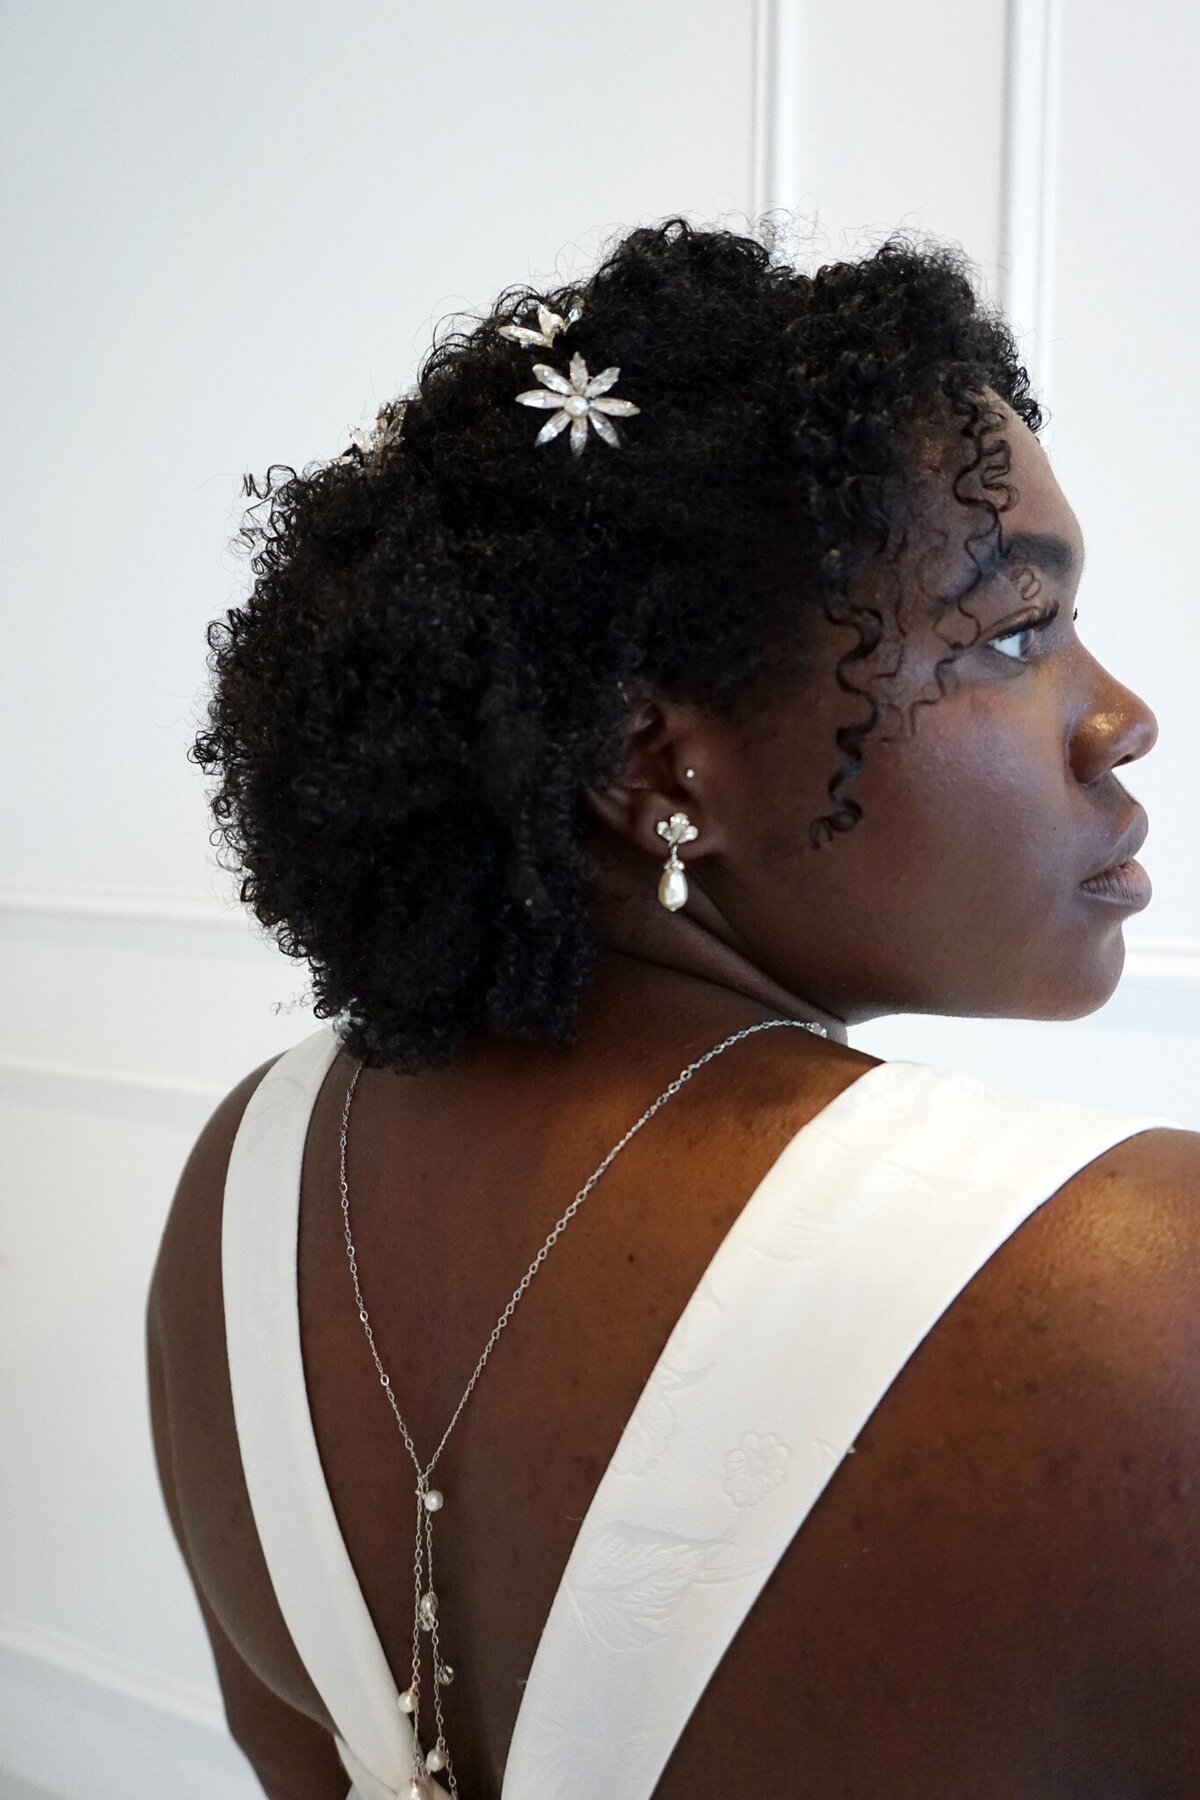 Back close-up of a black model in the Sol wedding dress style with a back necklace, earrings, and hair accessories by Ti Adoro.